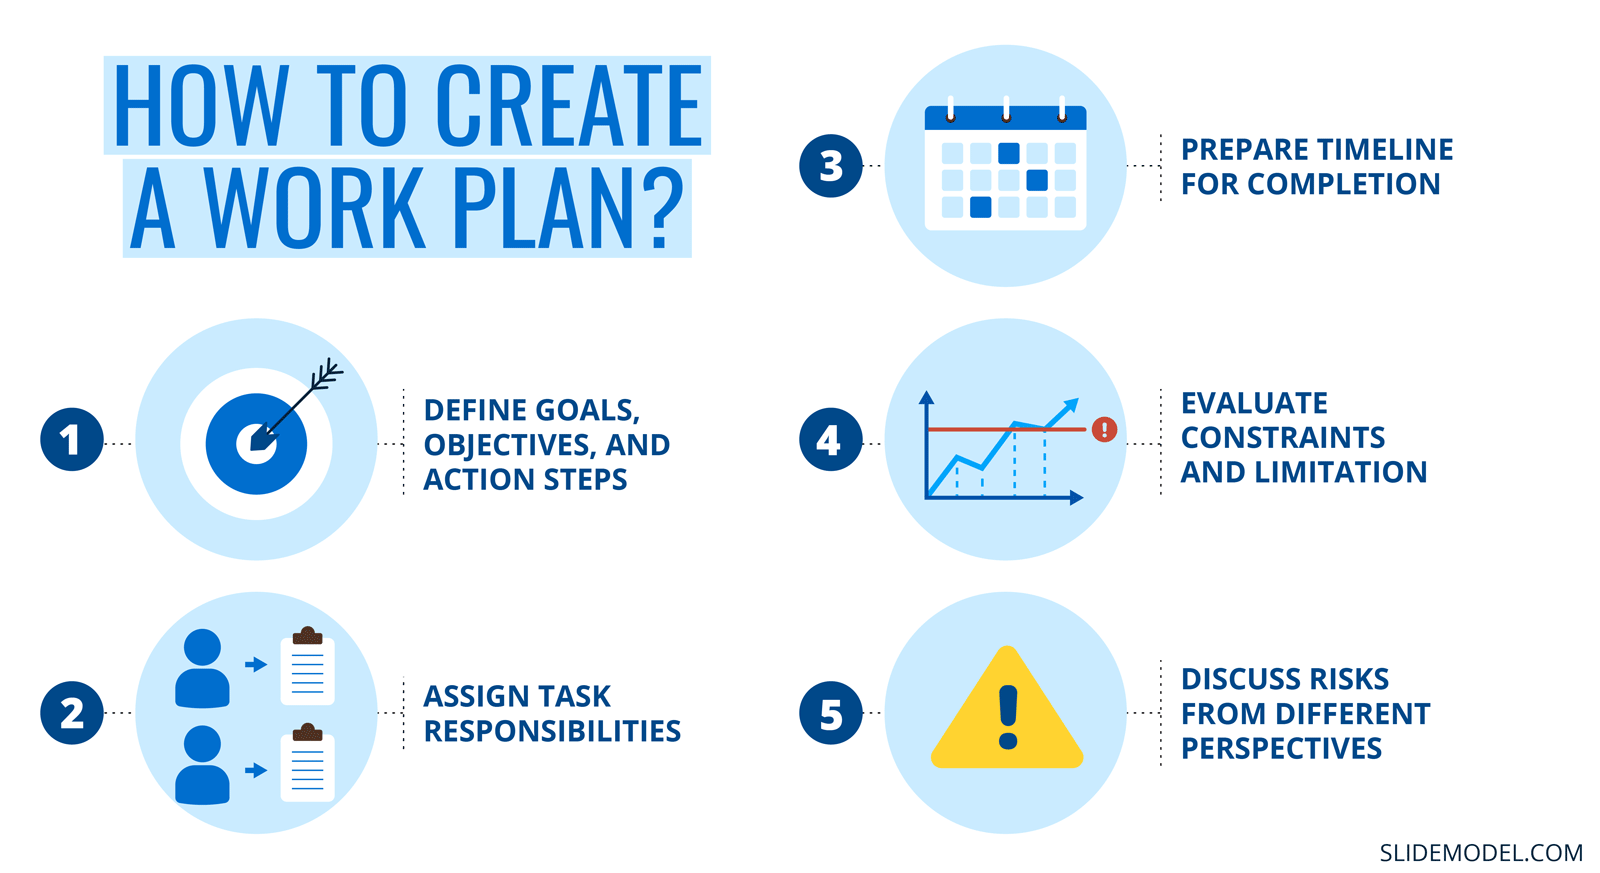 How to Create A Work Plan?